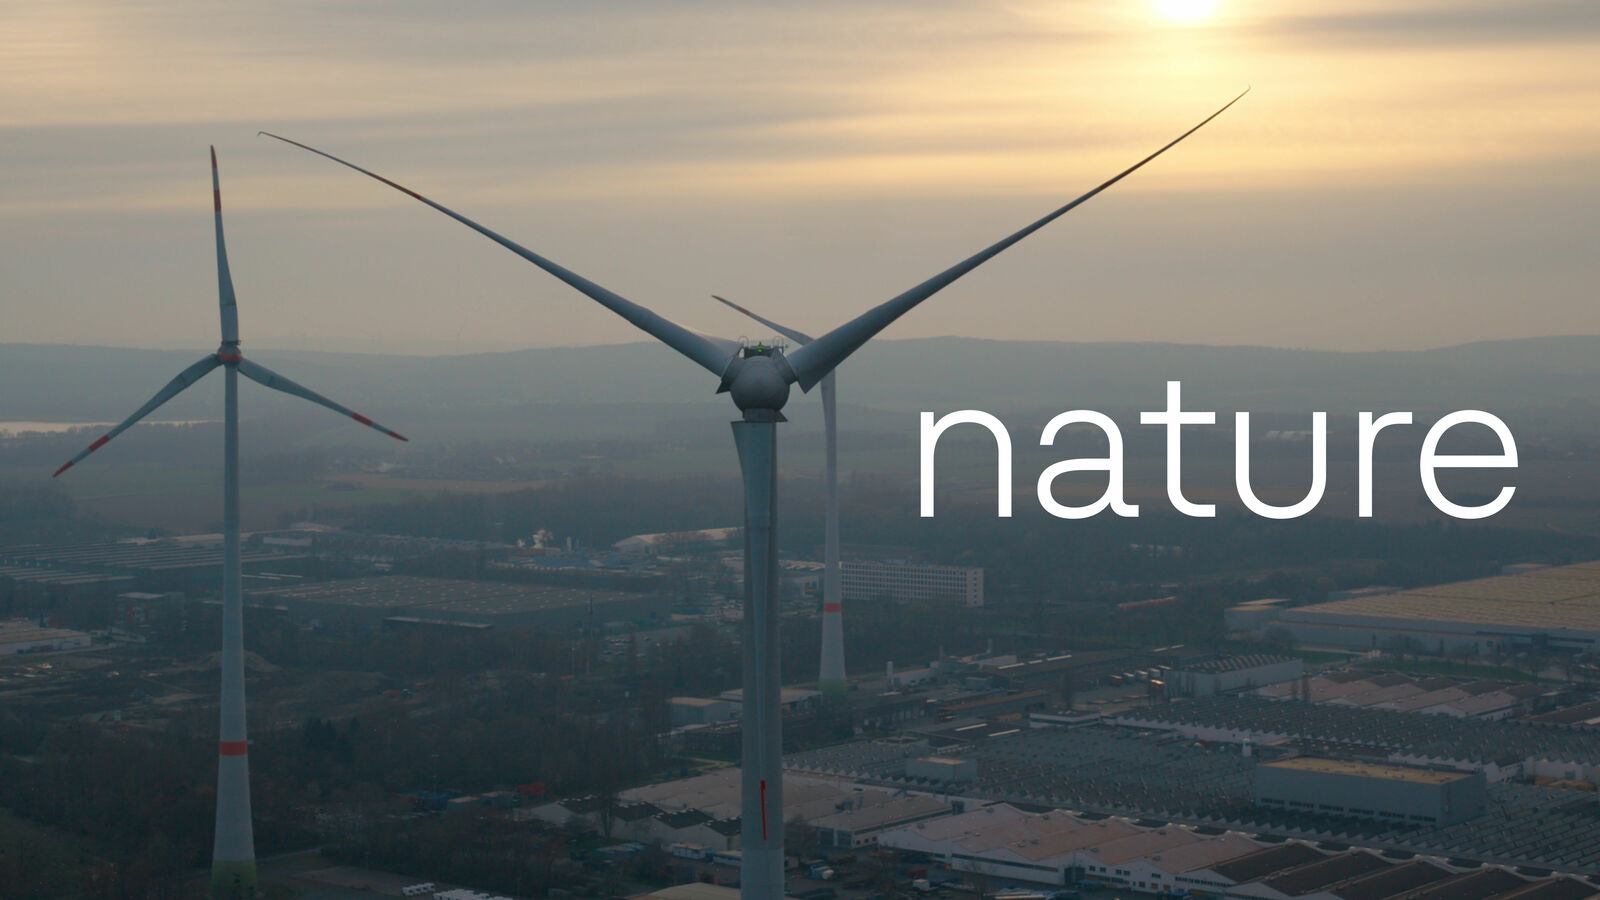 Wind turbines at sunset with the word "nature" overlaying the image.